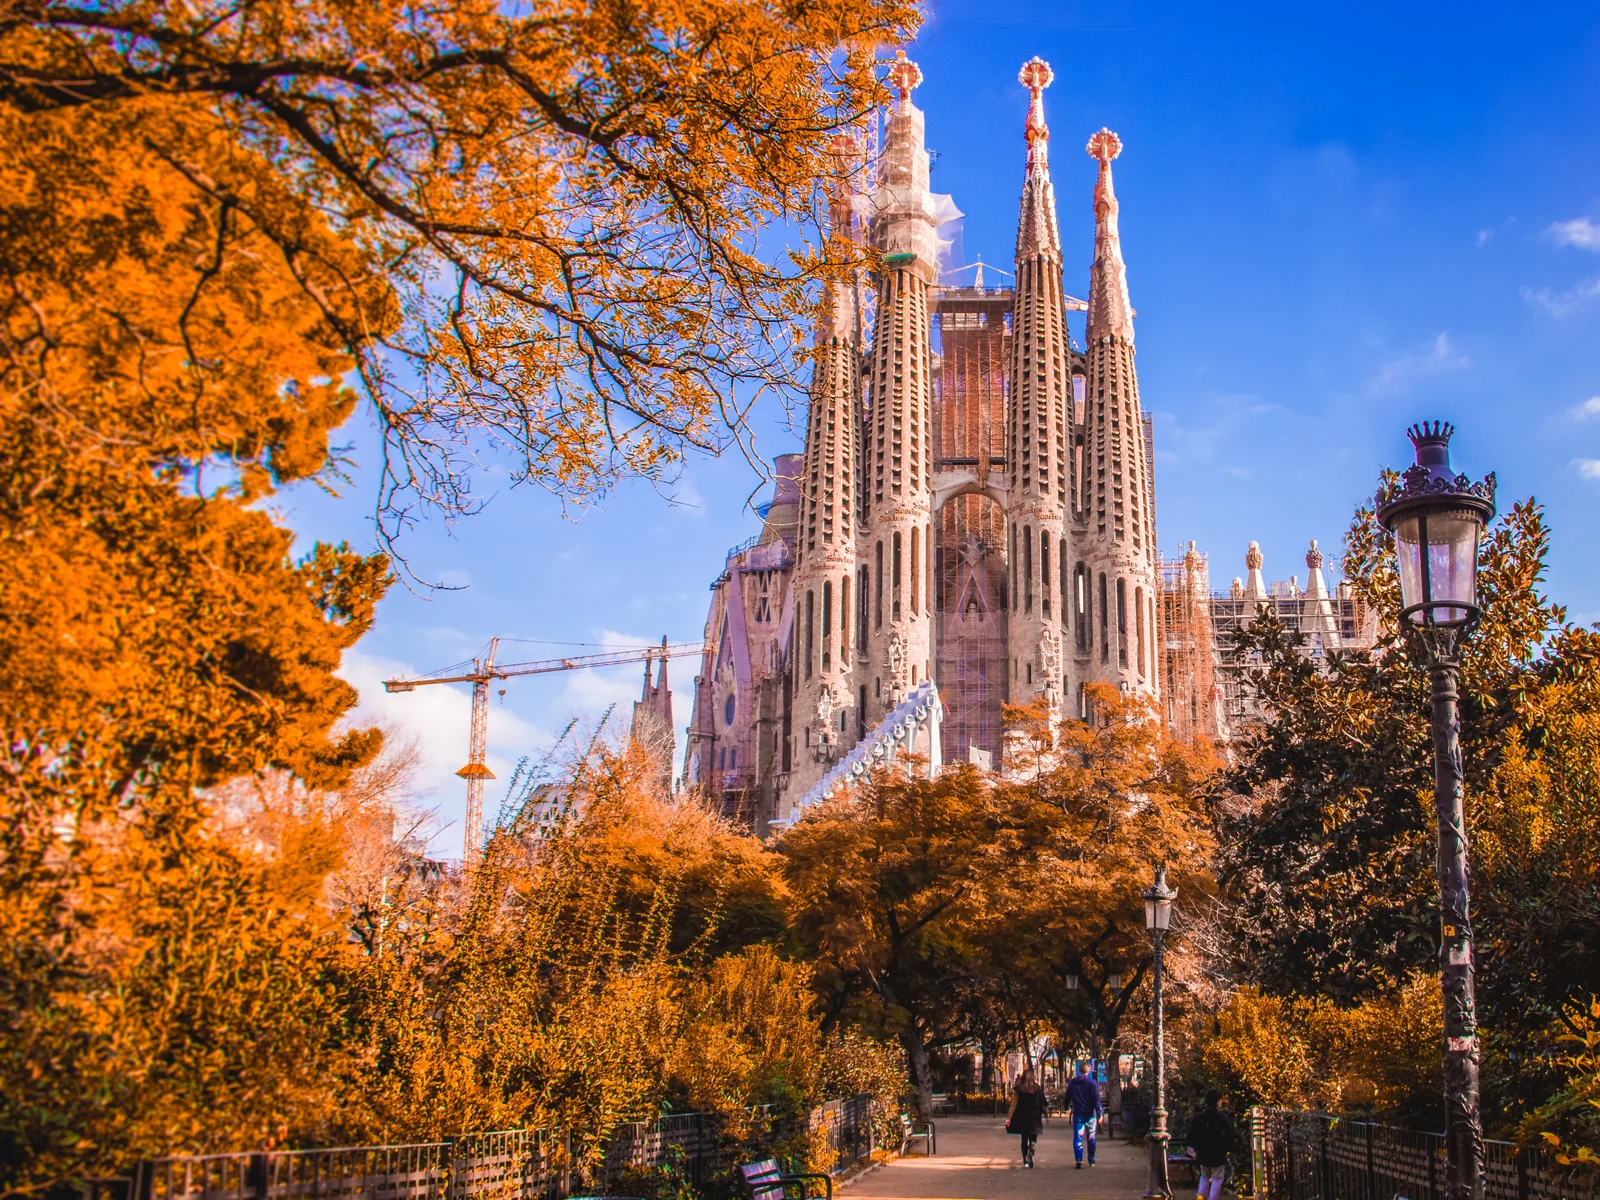 Basilica of the Sagrada Familia pictured during the cheapest time to go to Barcelona